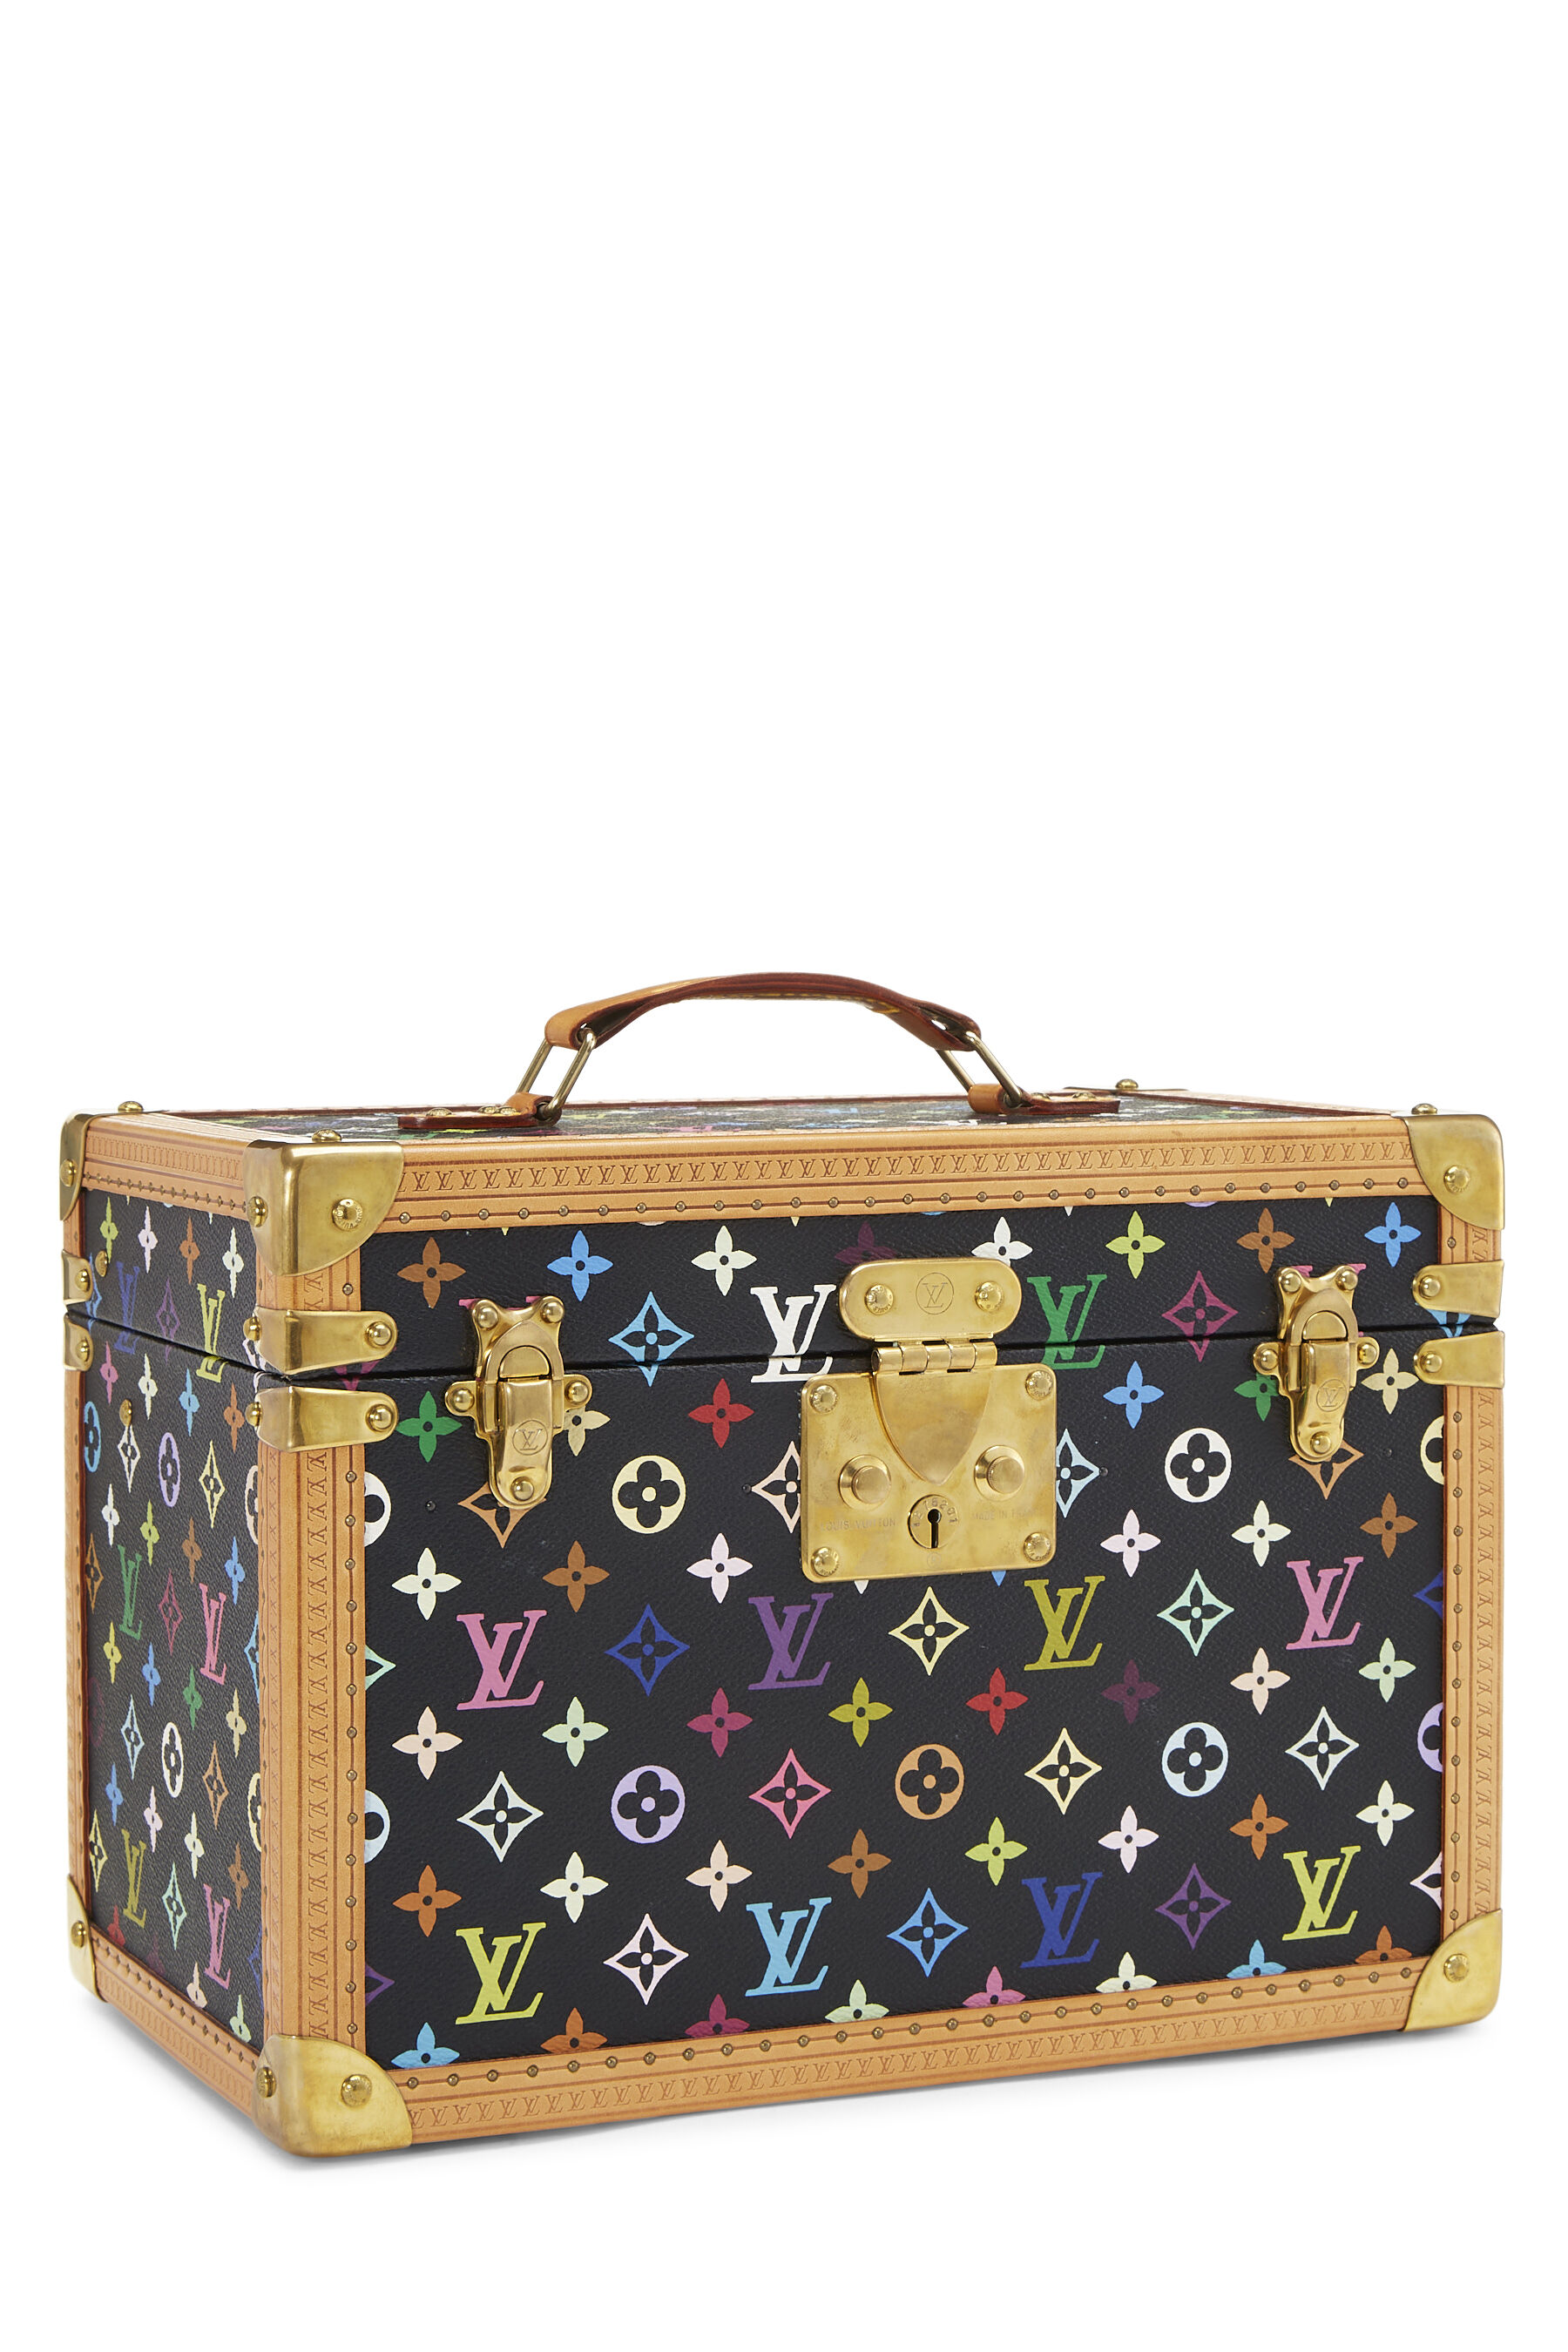 Louis Vuitton Takashi Murakami Black Monogram Multicolore Coated Canvas  Boite Bouteilles Et Glace Trunk Gold Hardware Available For Immediate Sale  At Sotheby's